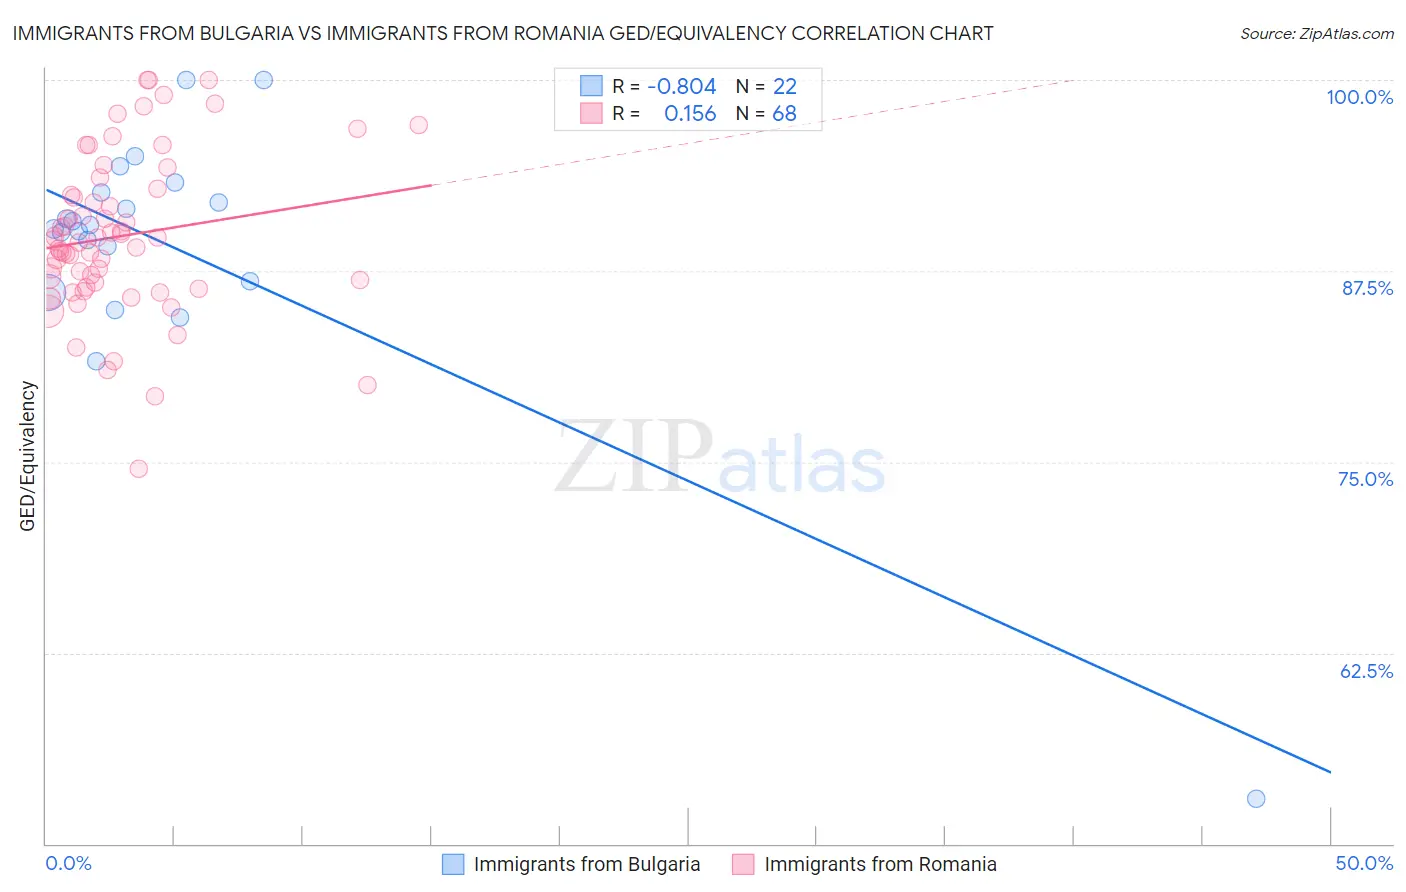 Immigrants from Bulgaria vs Immigrants from Romania GED/Equivalency